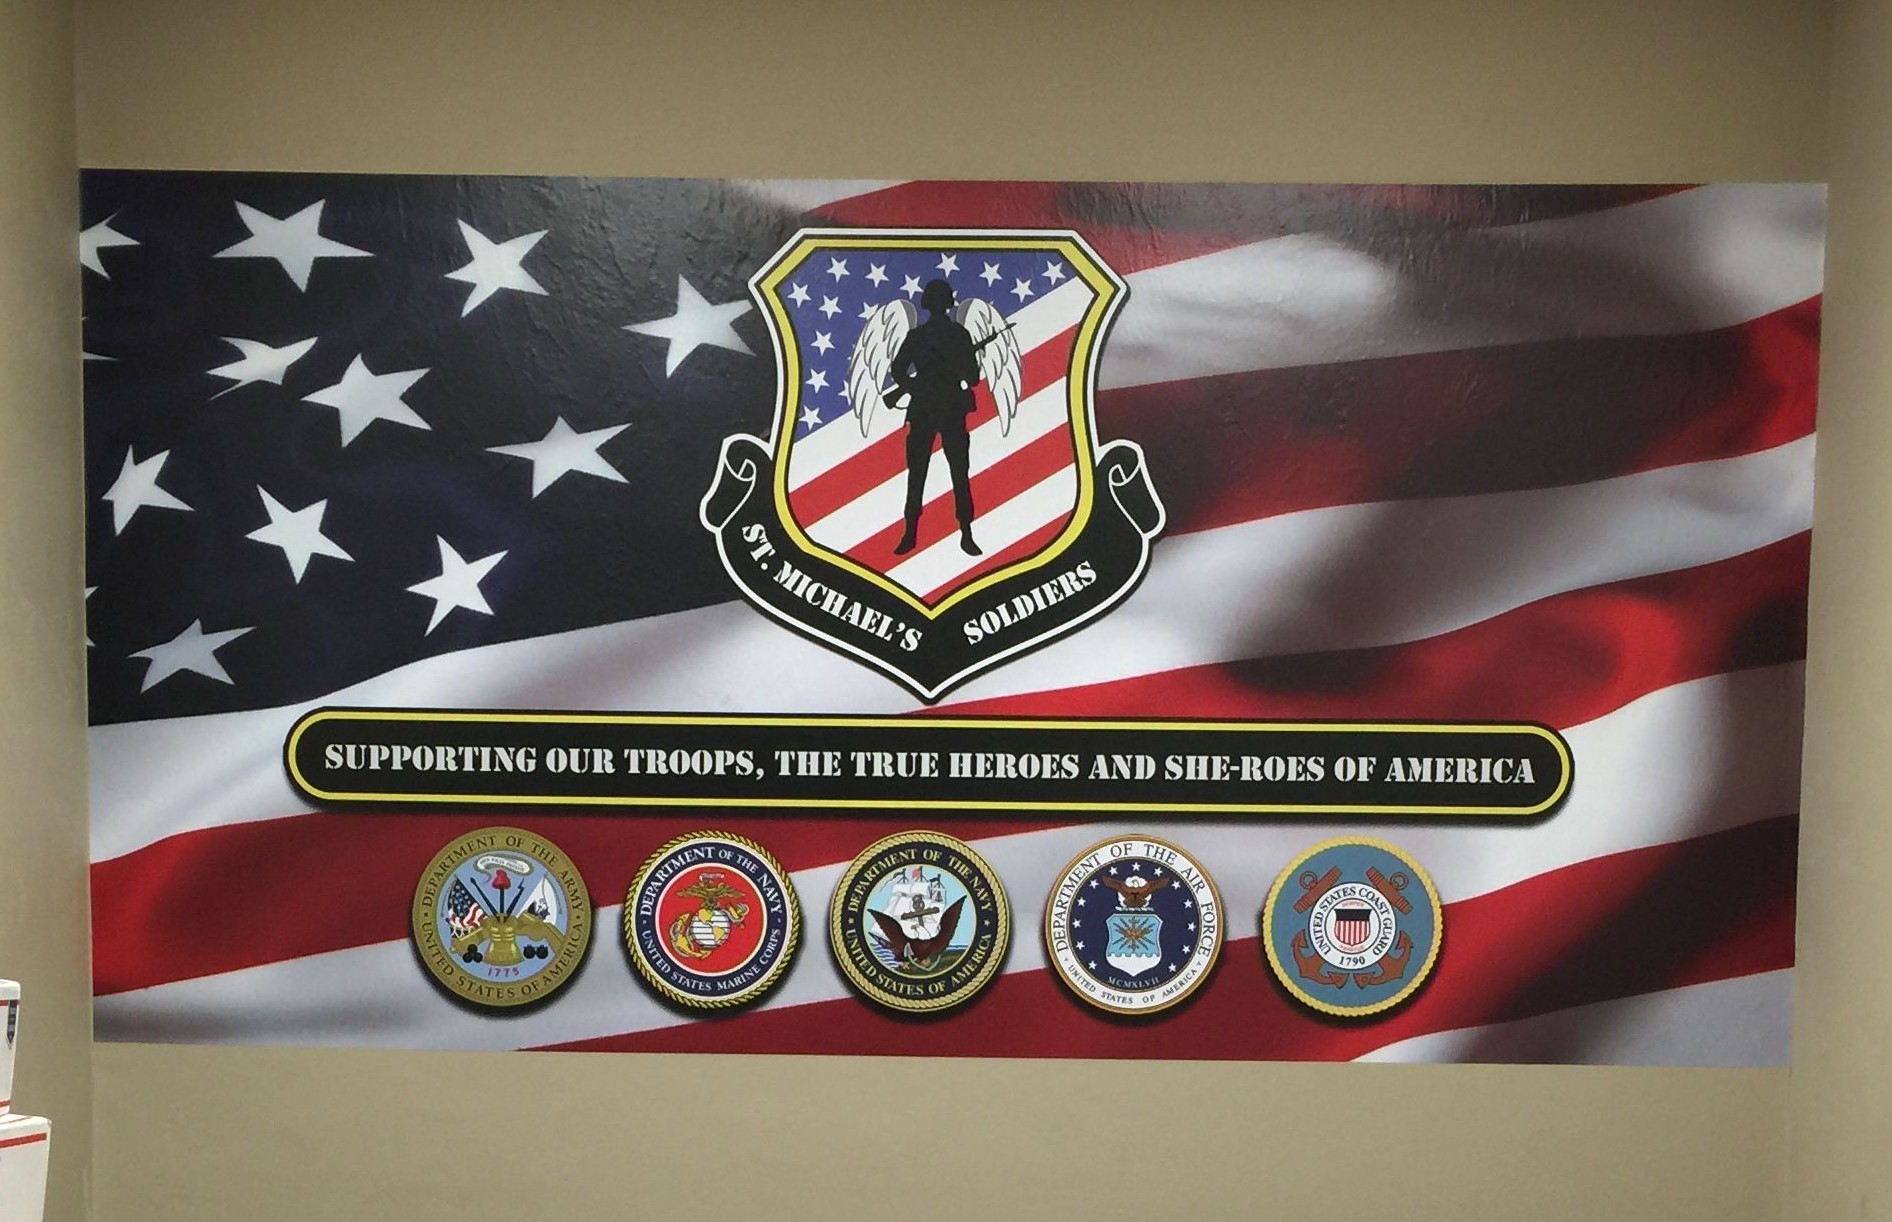 Interior custom American flag and United States of America military-themed vinyl wall wrap depicted on the inside wall of a home office building.